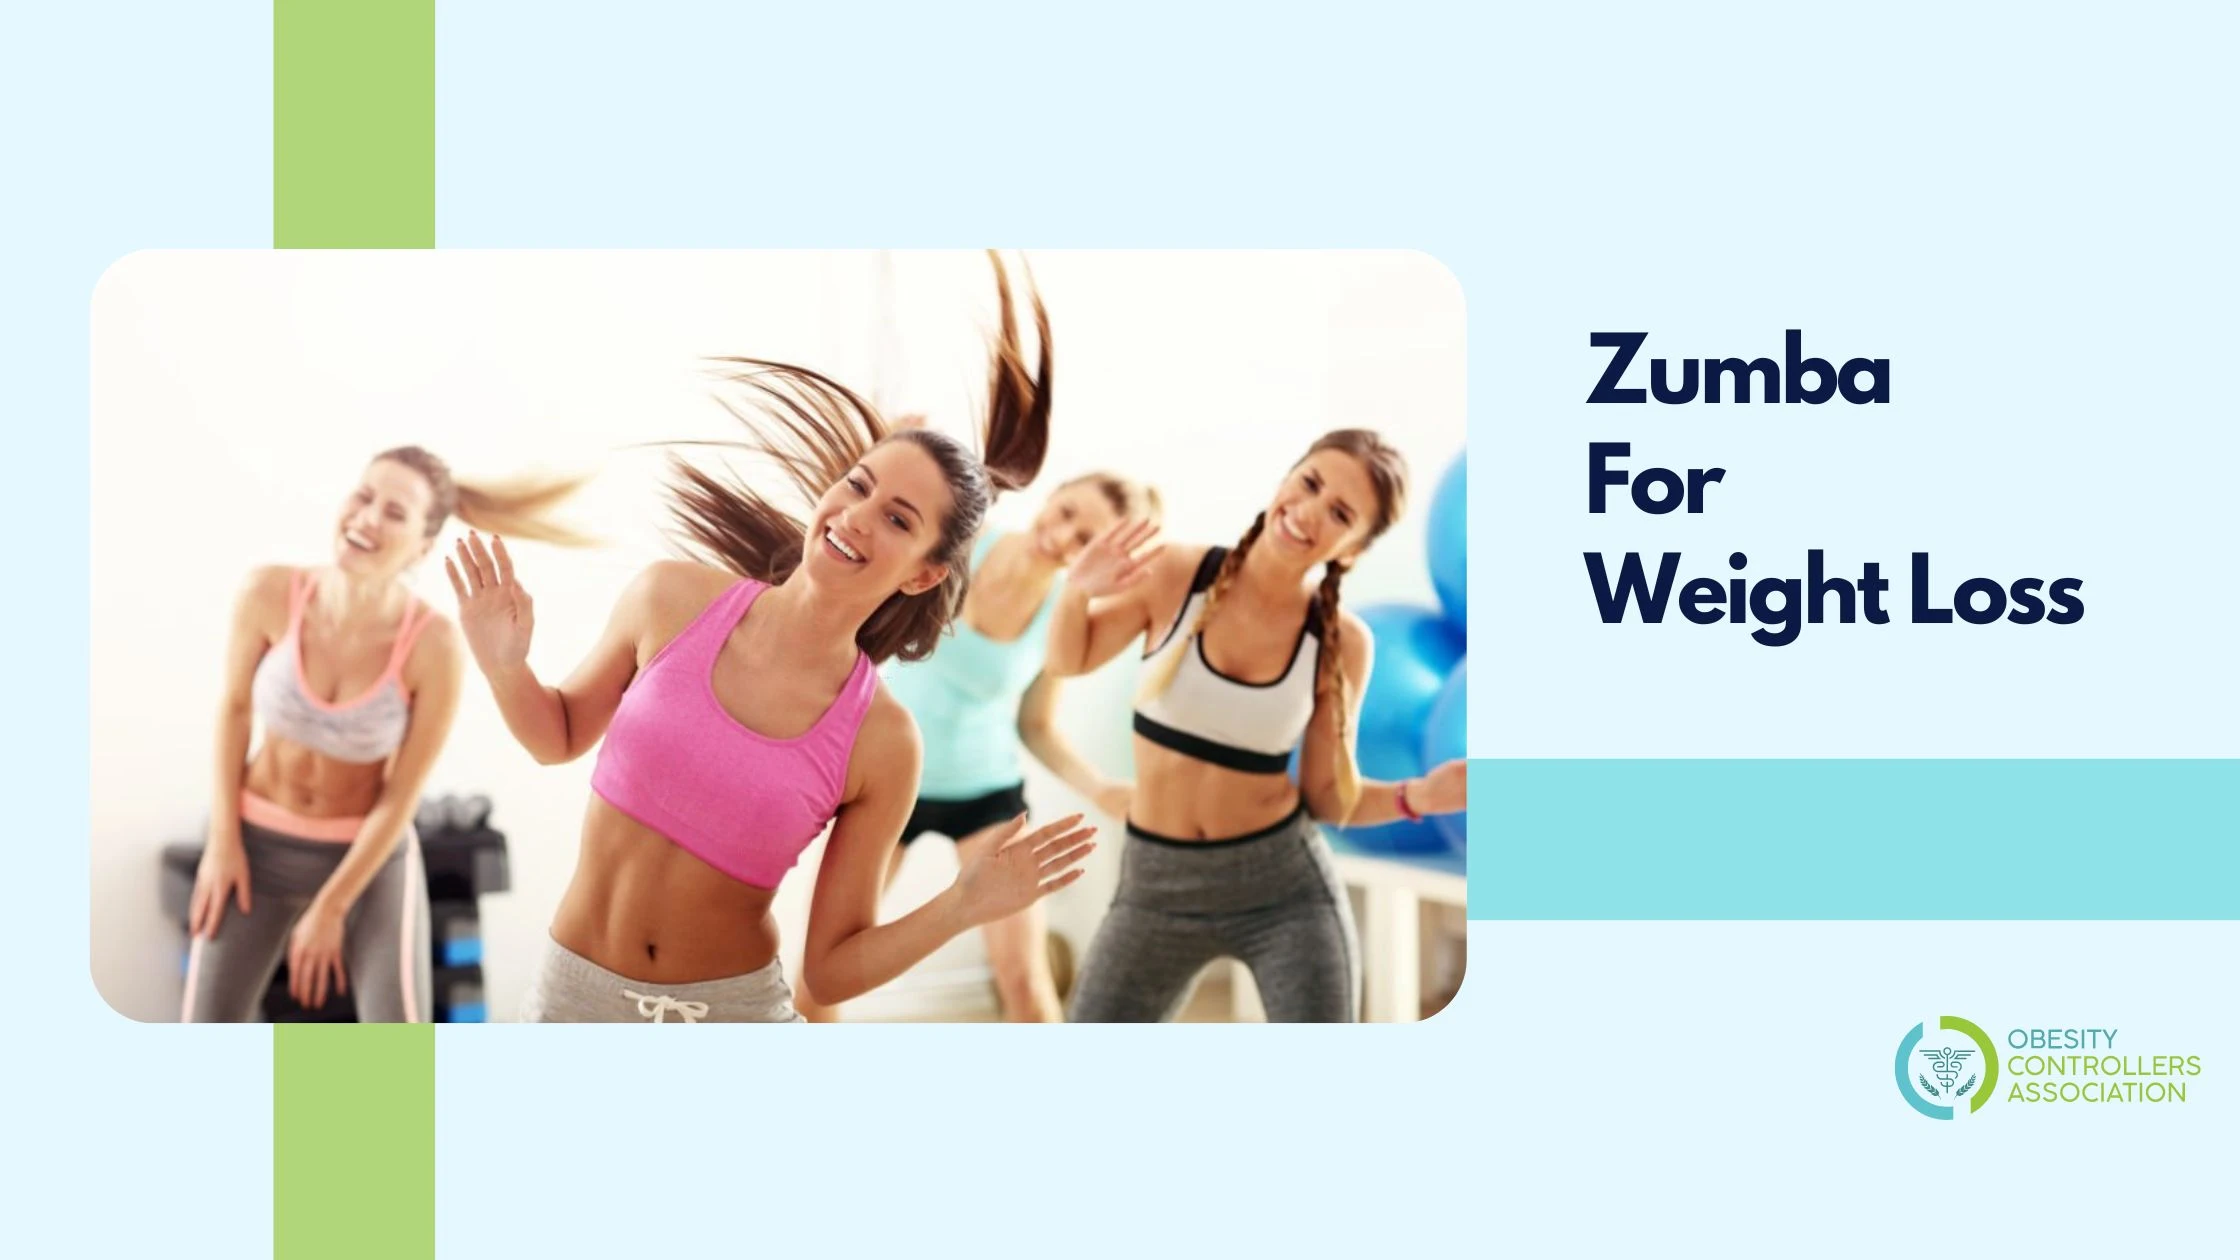 Zumba For Weight Loss